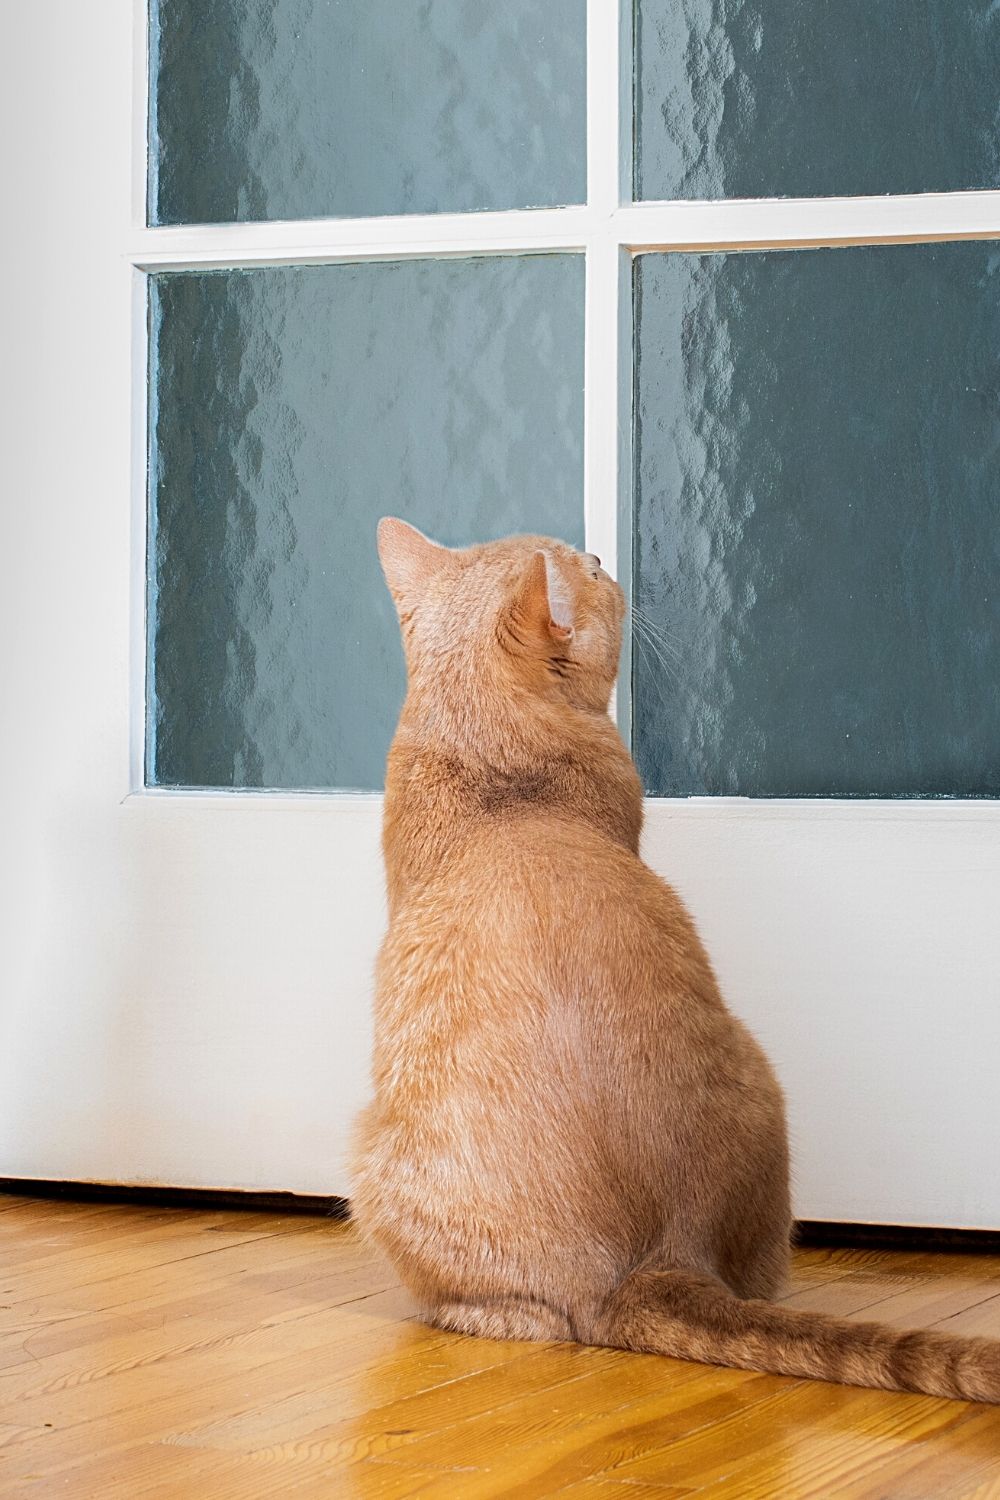 Cats hate closed doors as they need their fur parent's attention